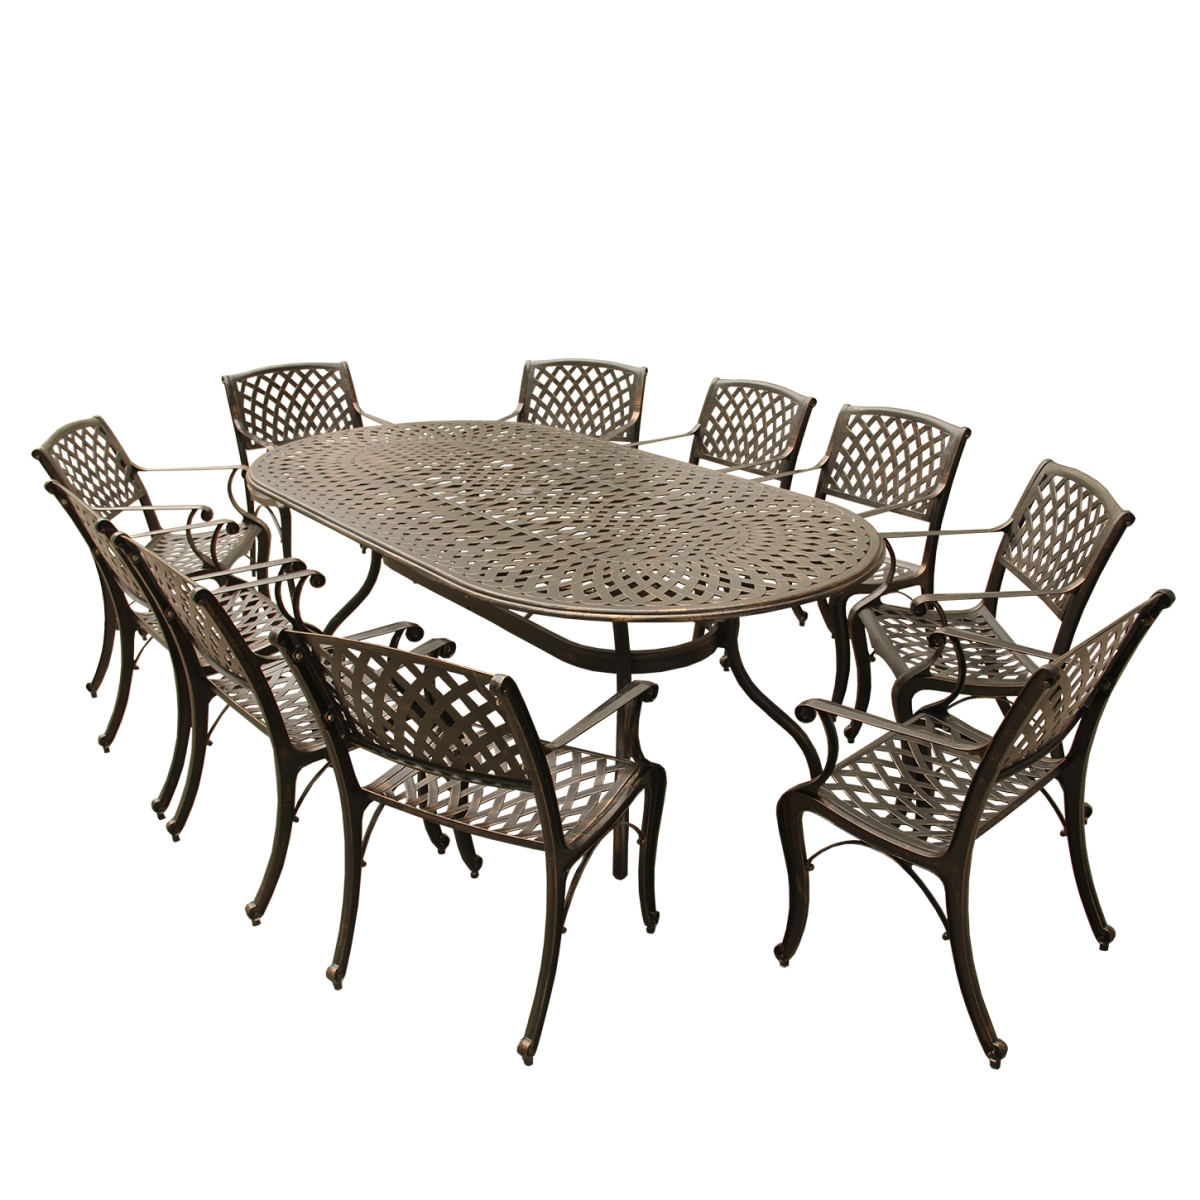 Picture of Oakland Living 1025-1016-10-BZ 95 in. Contemporary Modern Outdoor Mesh Lattice Aluminium Oval Dining Set with Ten Chairs, Bronze